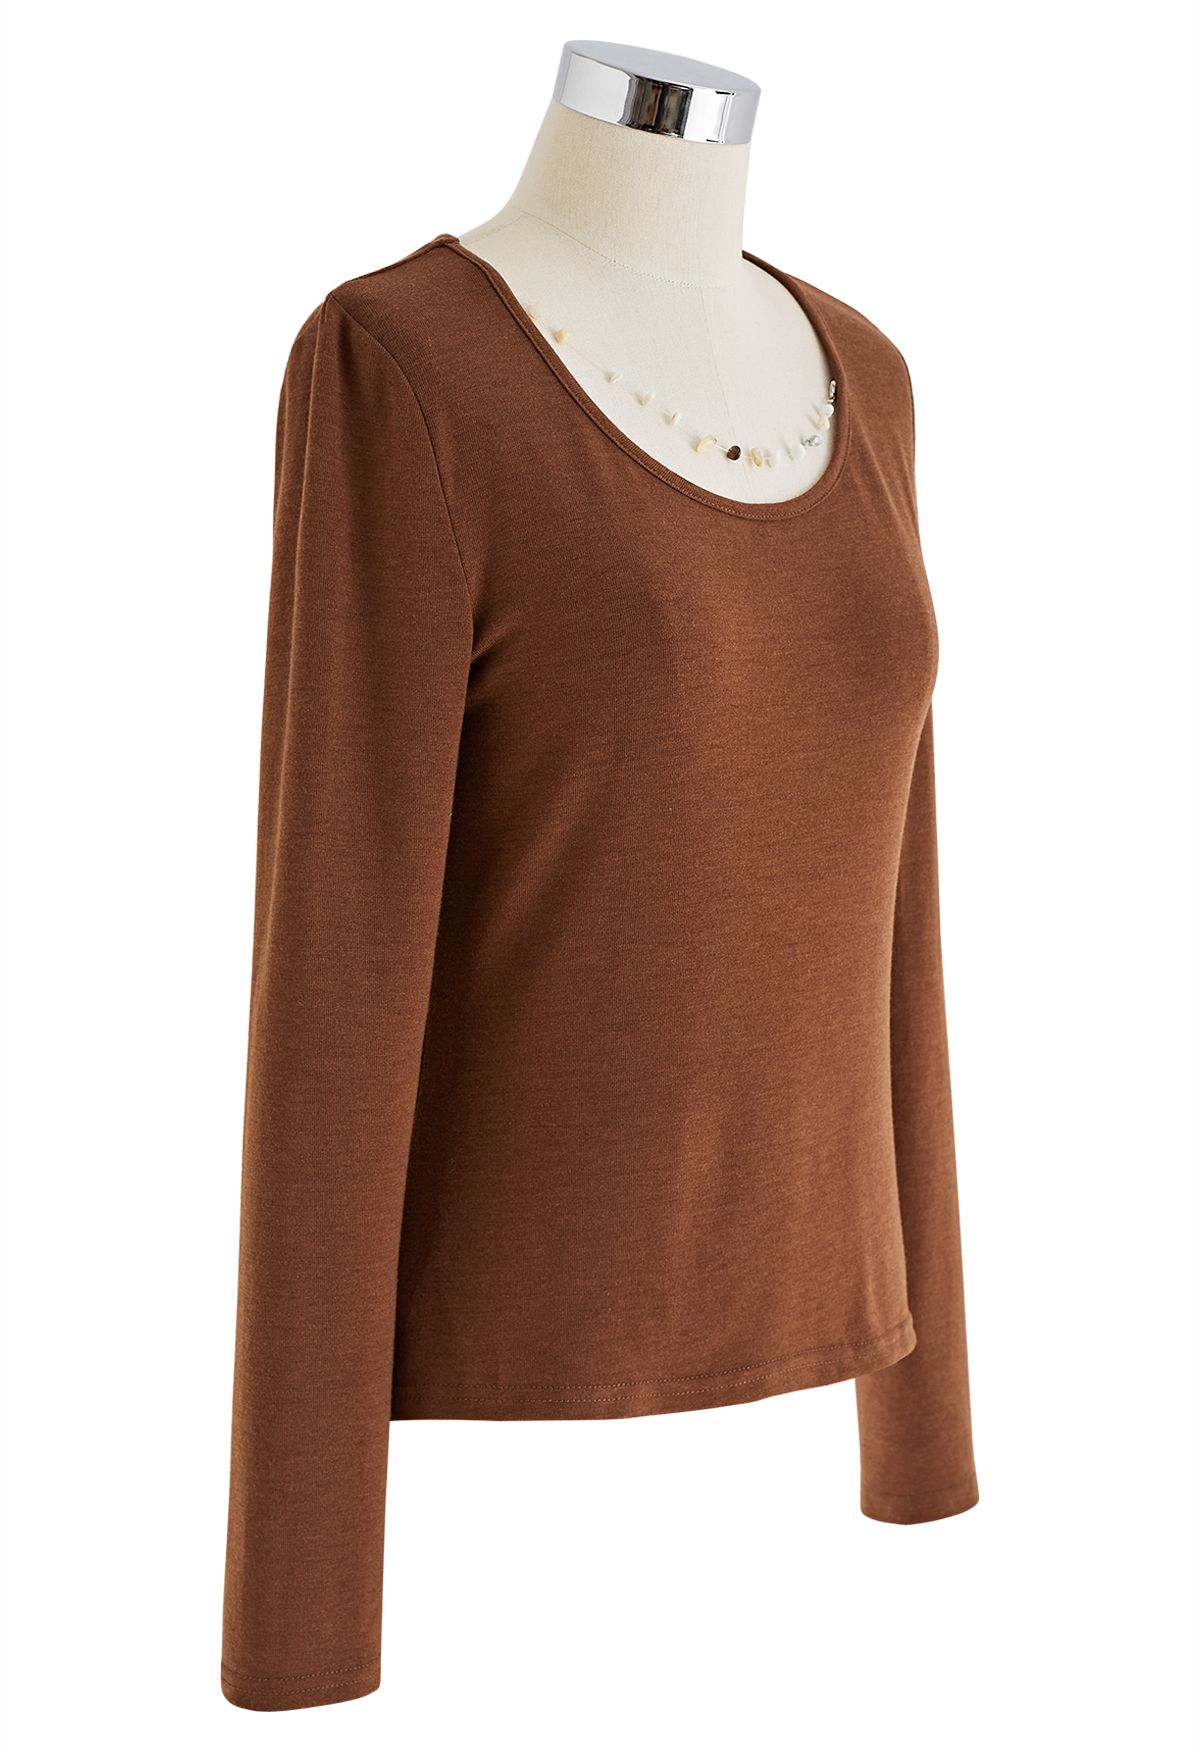 Pebble Necklace Long Sleeve Top in Brown